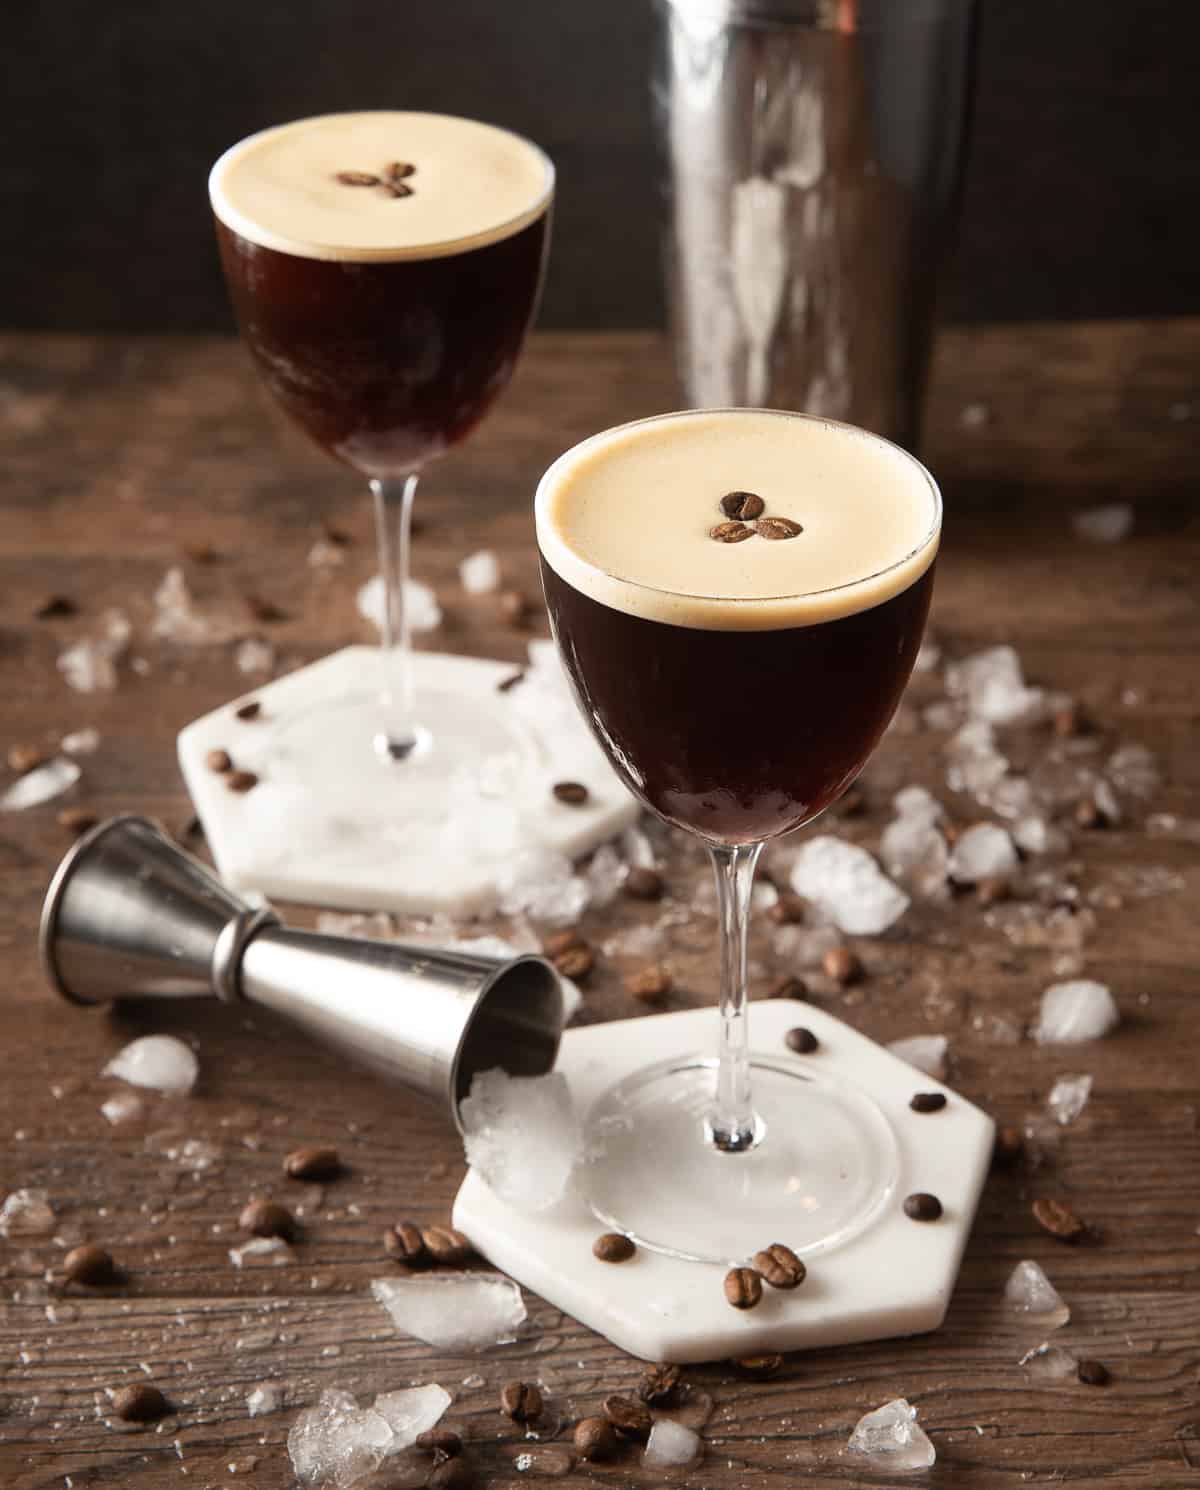 ESPRESSO MARTINIS ARE TIMELESS WITH ABSOLUT AND KAHLUA'S NEW